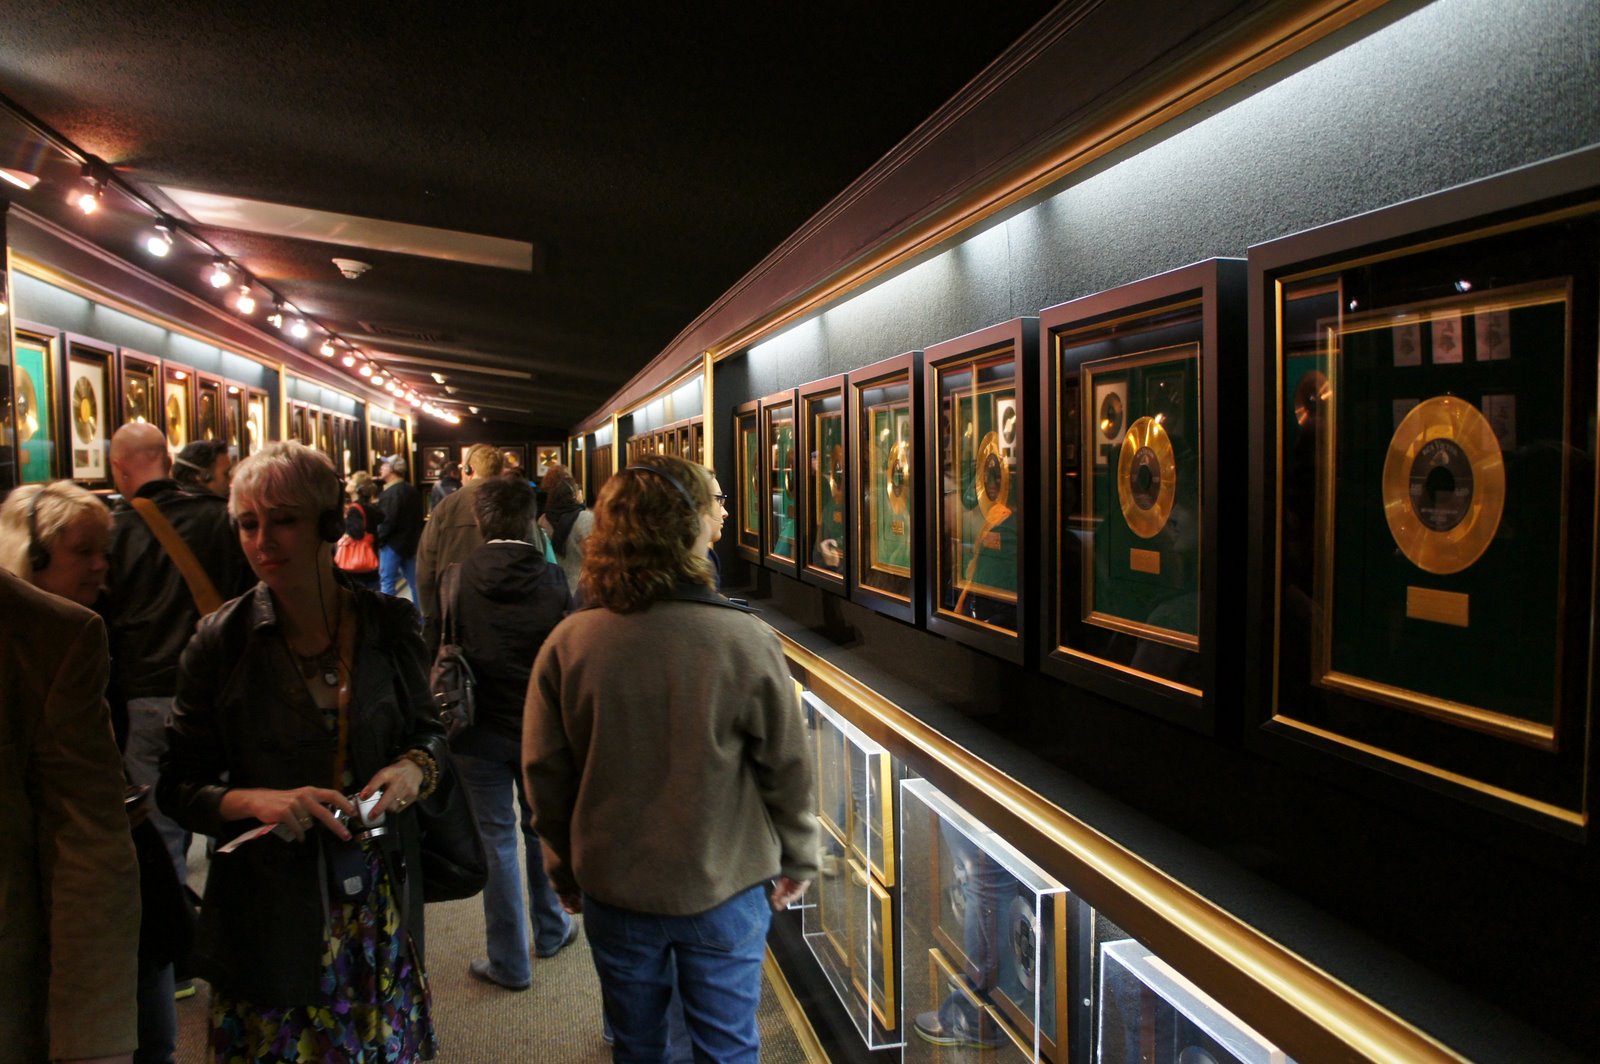 Home of the Hodgi: Inside Graceland, and the Elvis-mobiles1600 x 1064